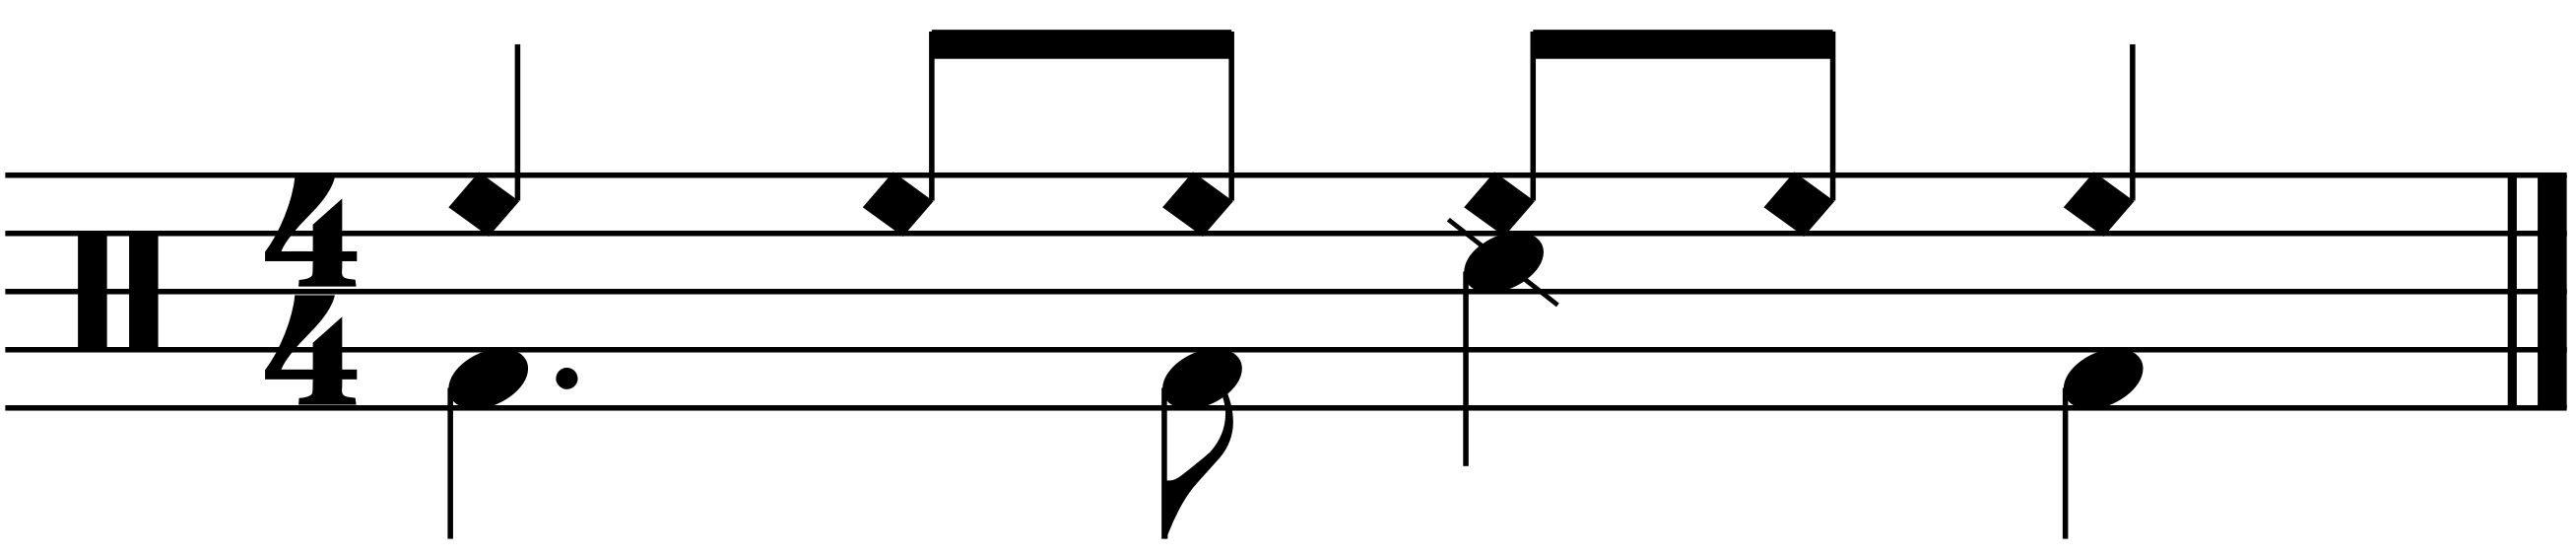 A groove lesson